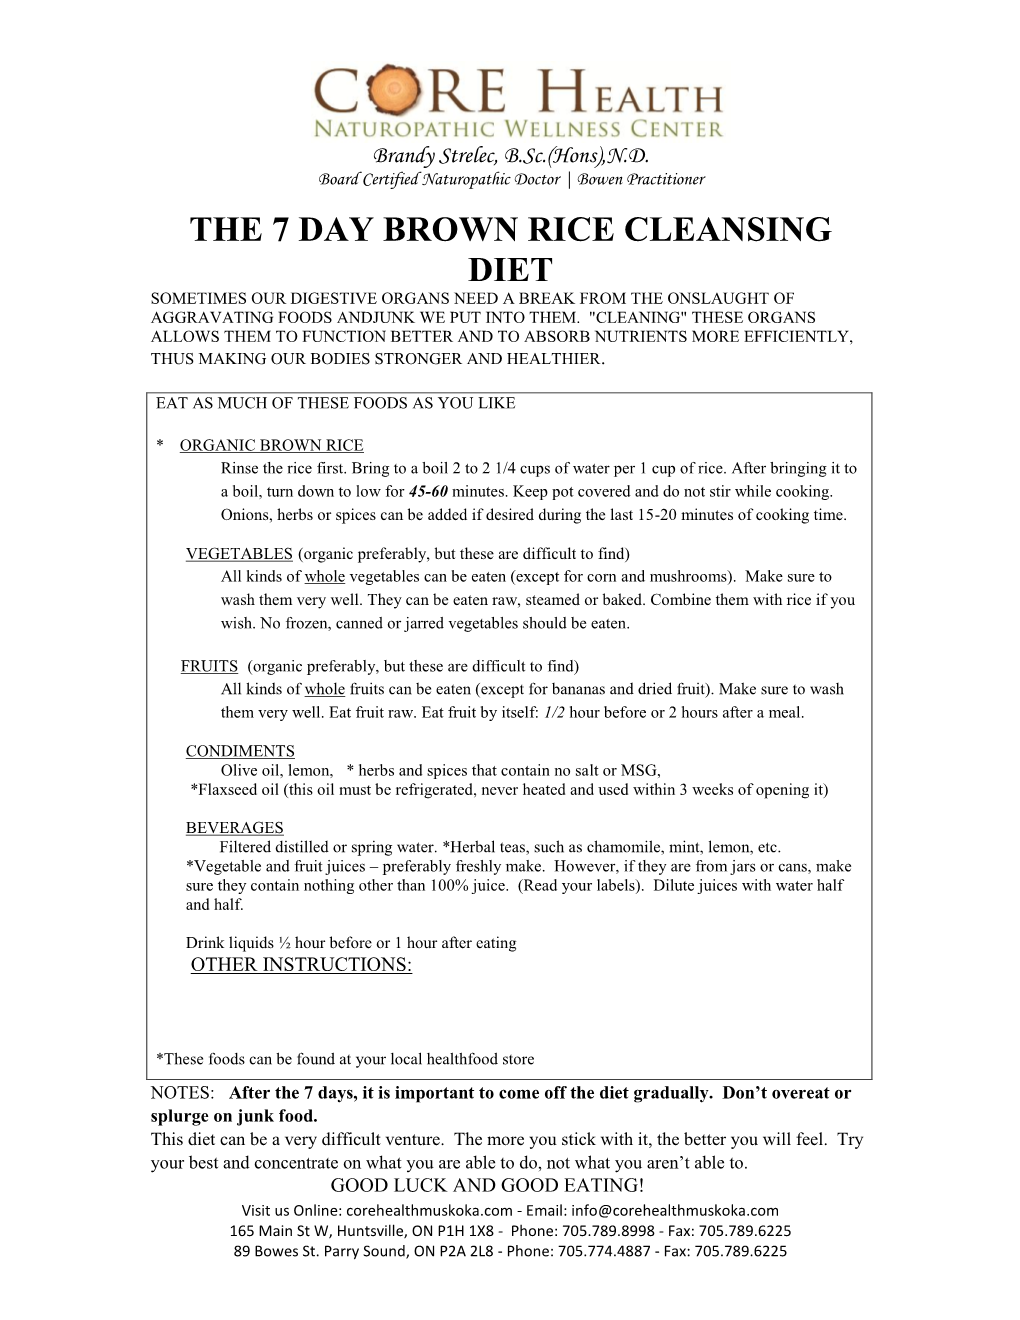 The 7 Day Brown Rice Cleansing Diet Sometimes Our Digestive Organs Need a Break from the Onslaught of Aggravating Foods Andjunk We Put Into Them